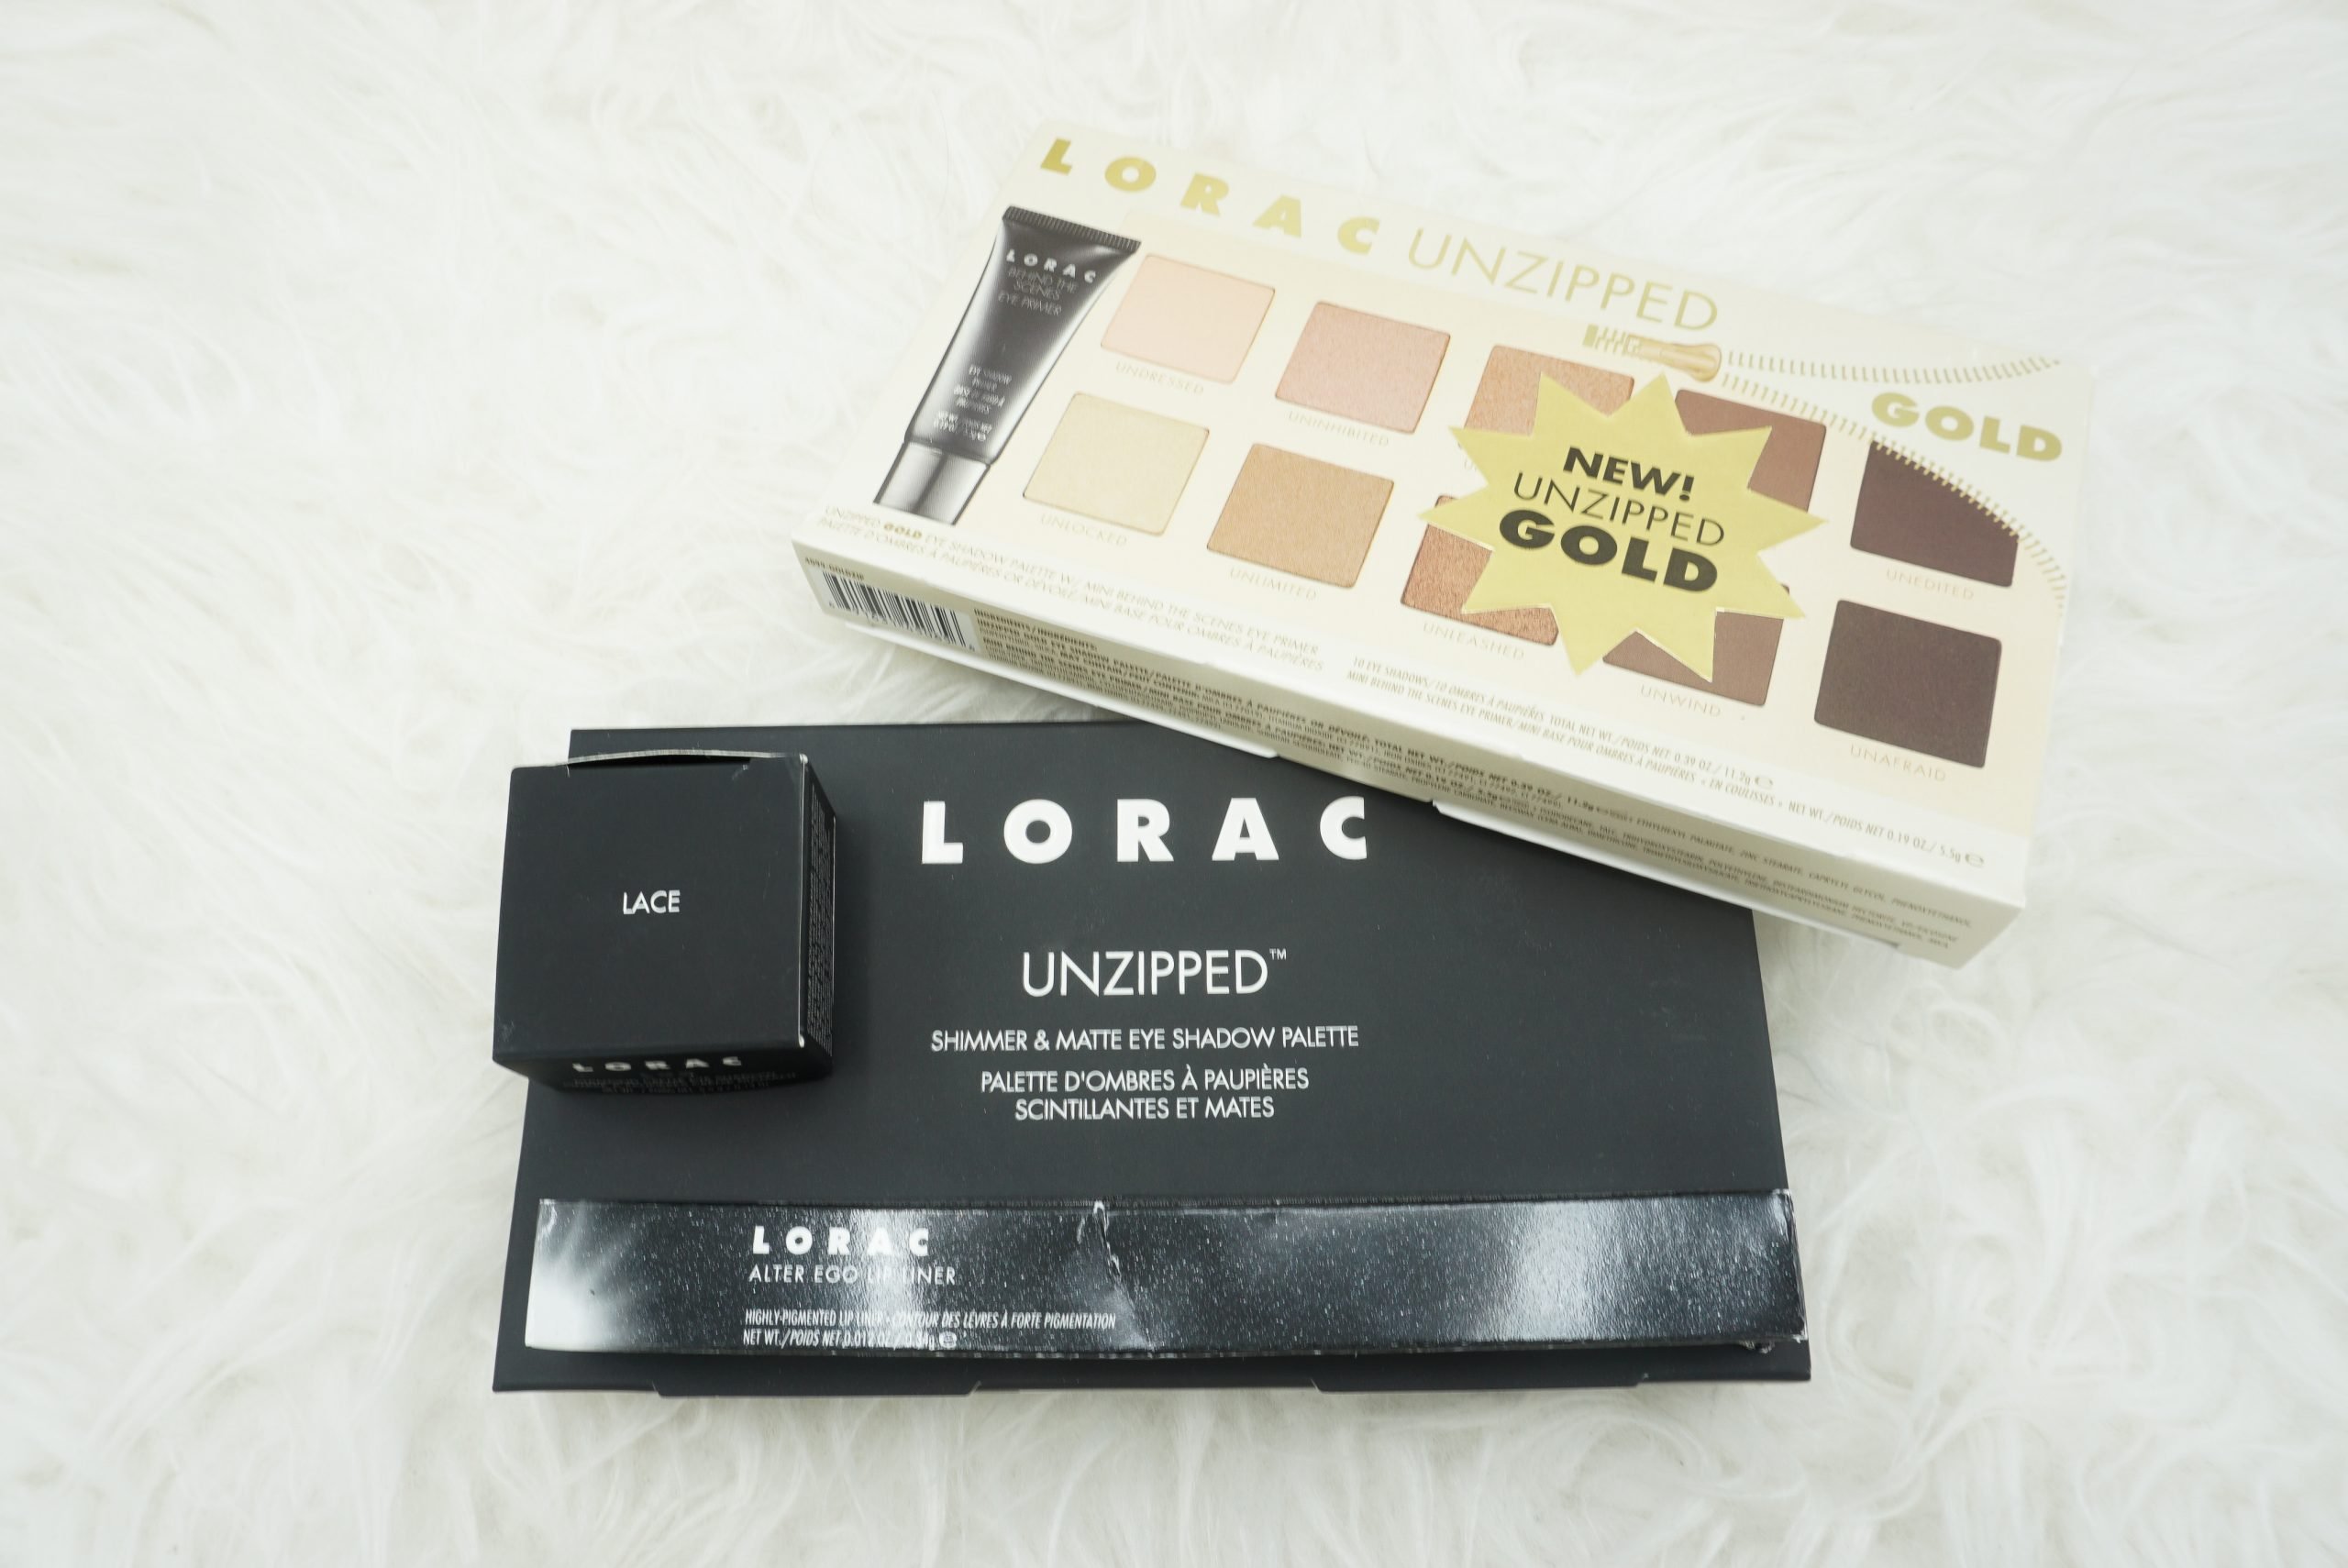 Lorac Cosmetics Unzipped And Unzipped Gold Palettes + More | Haul, Review, And Swatches